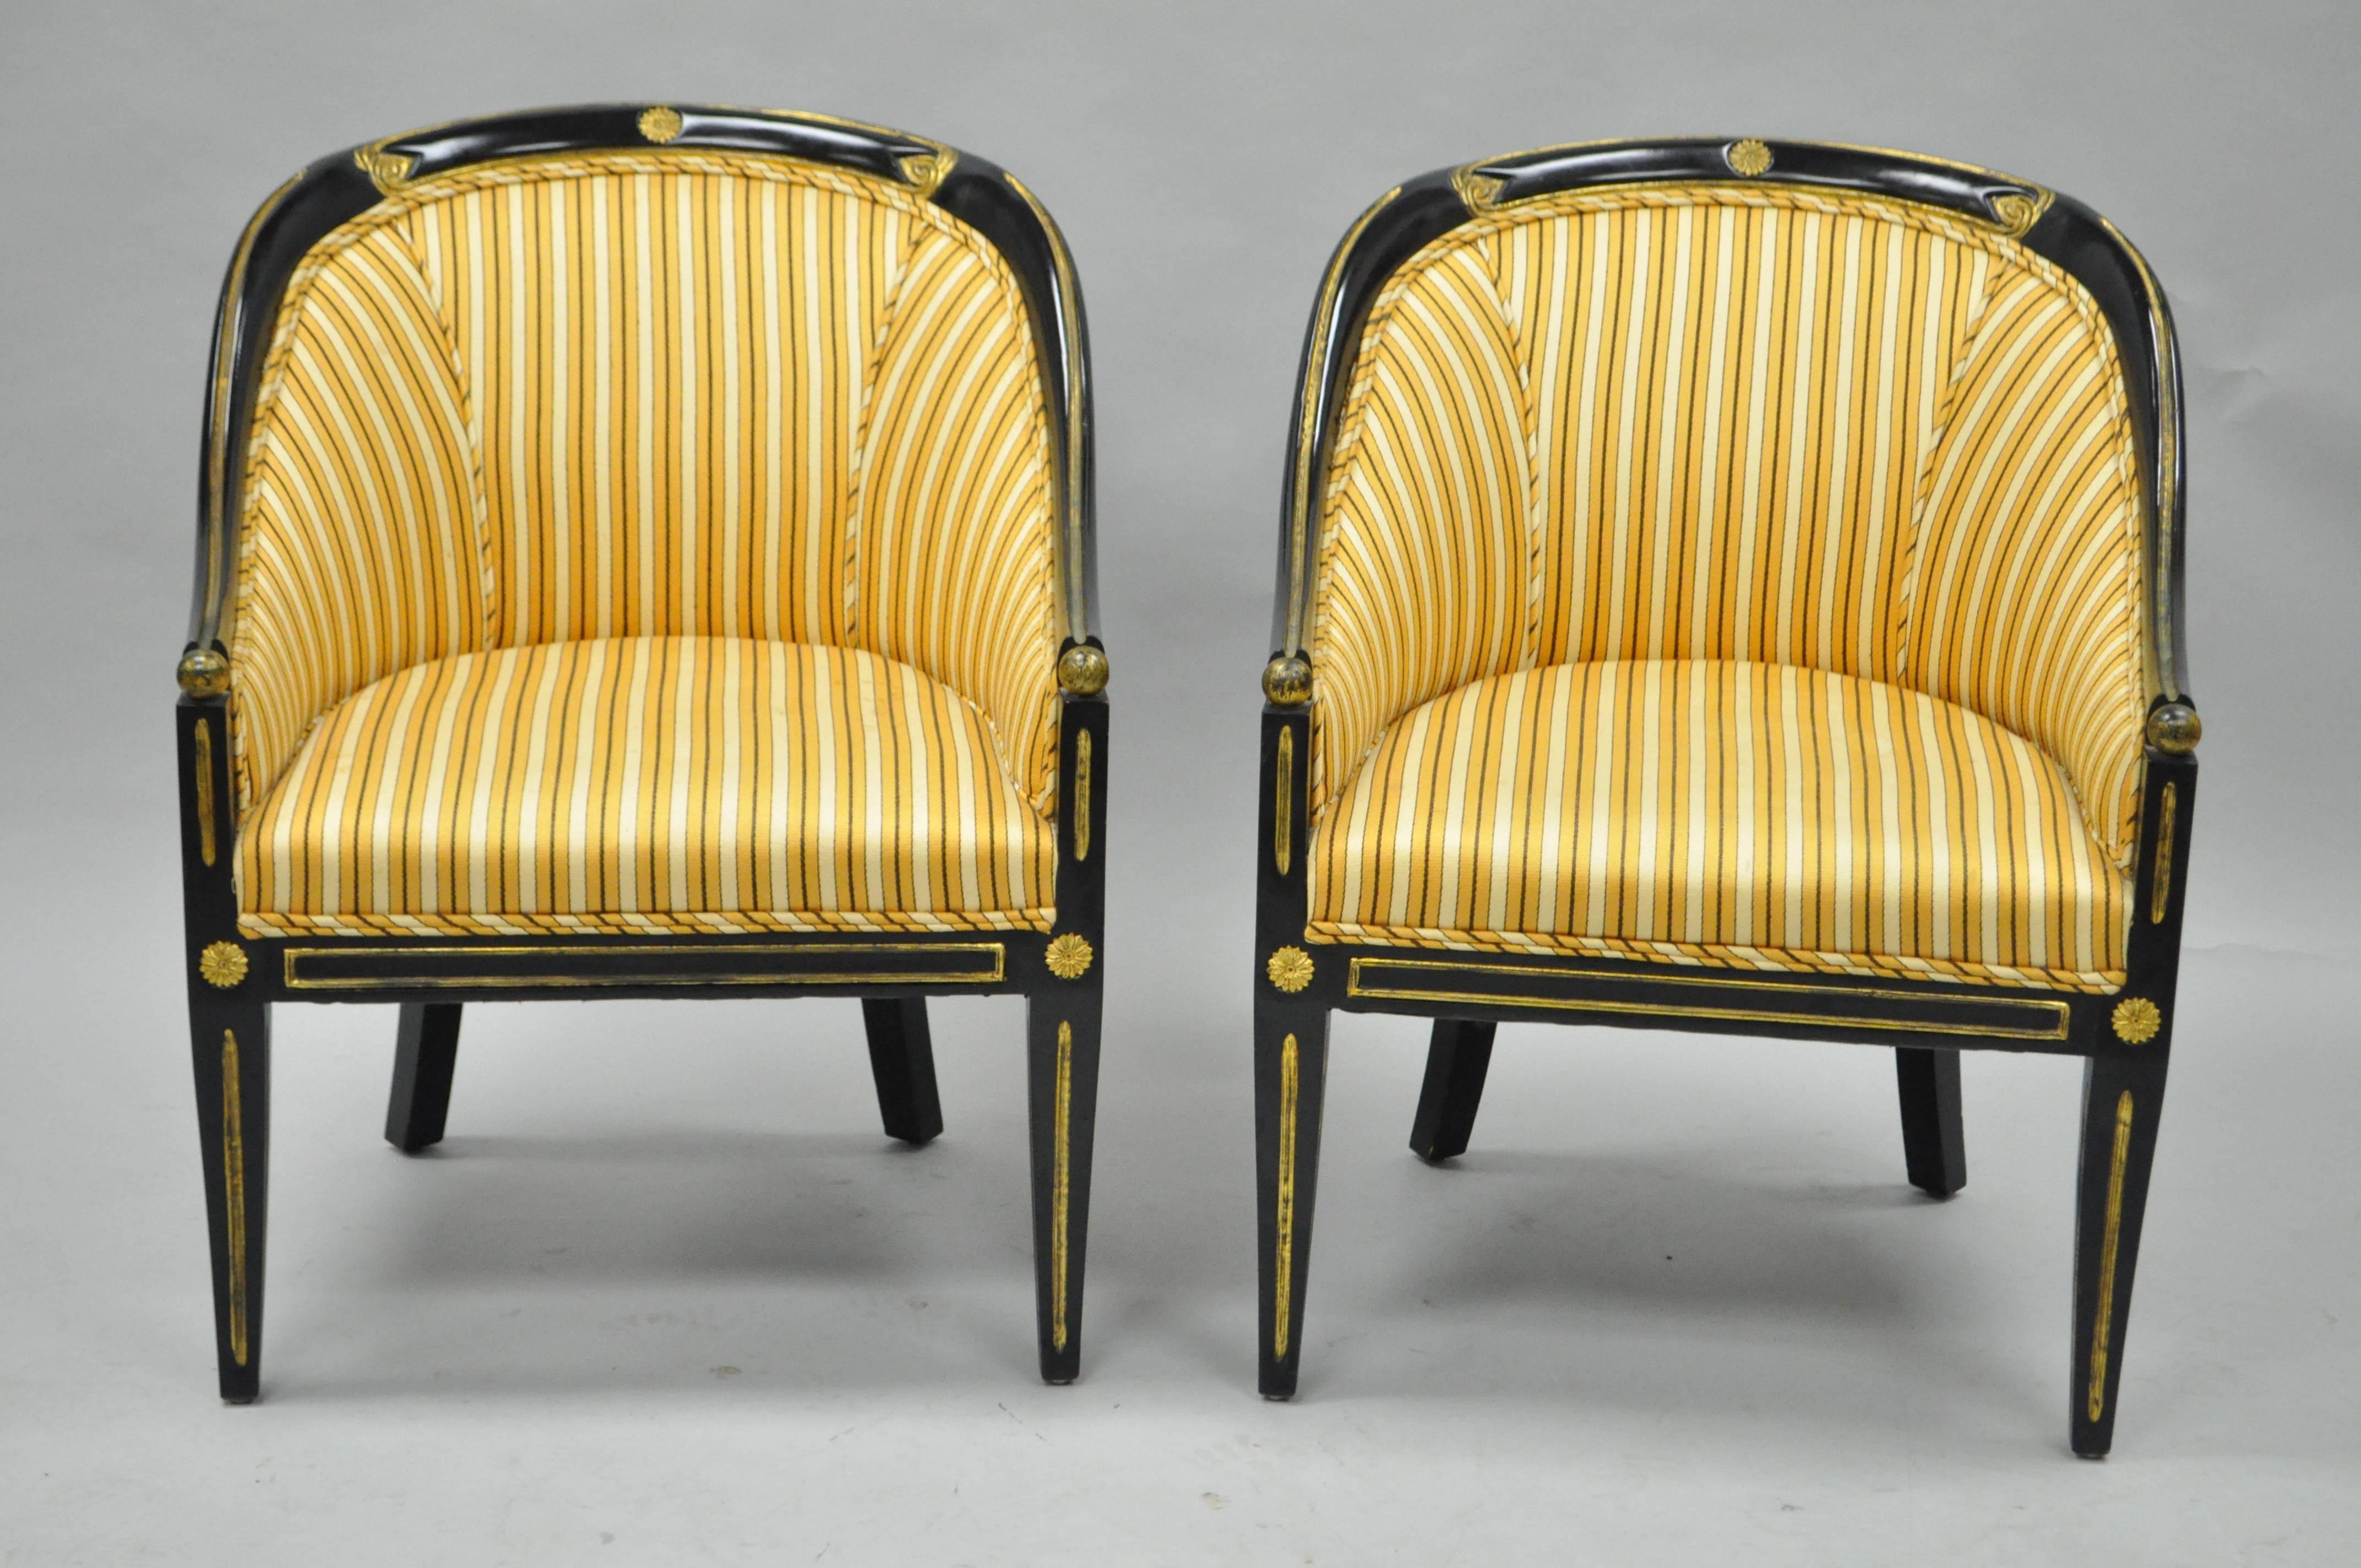 Pair of vintage black ebonized and gold neoclassical / Regency style barrel back accent chairs. This item features black lacquered solid wood barrel back frames, antiqued gold painted accents and trim, striped gold fabric, saber / Klismos legs, very